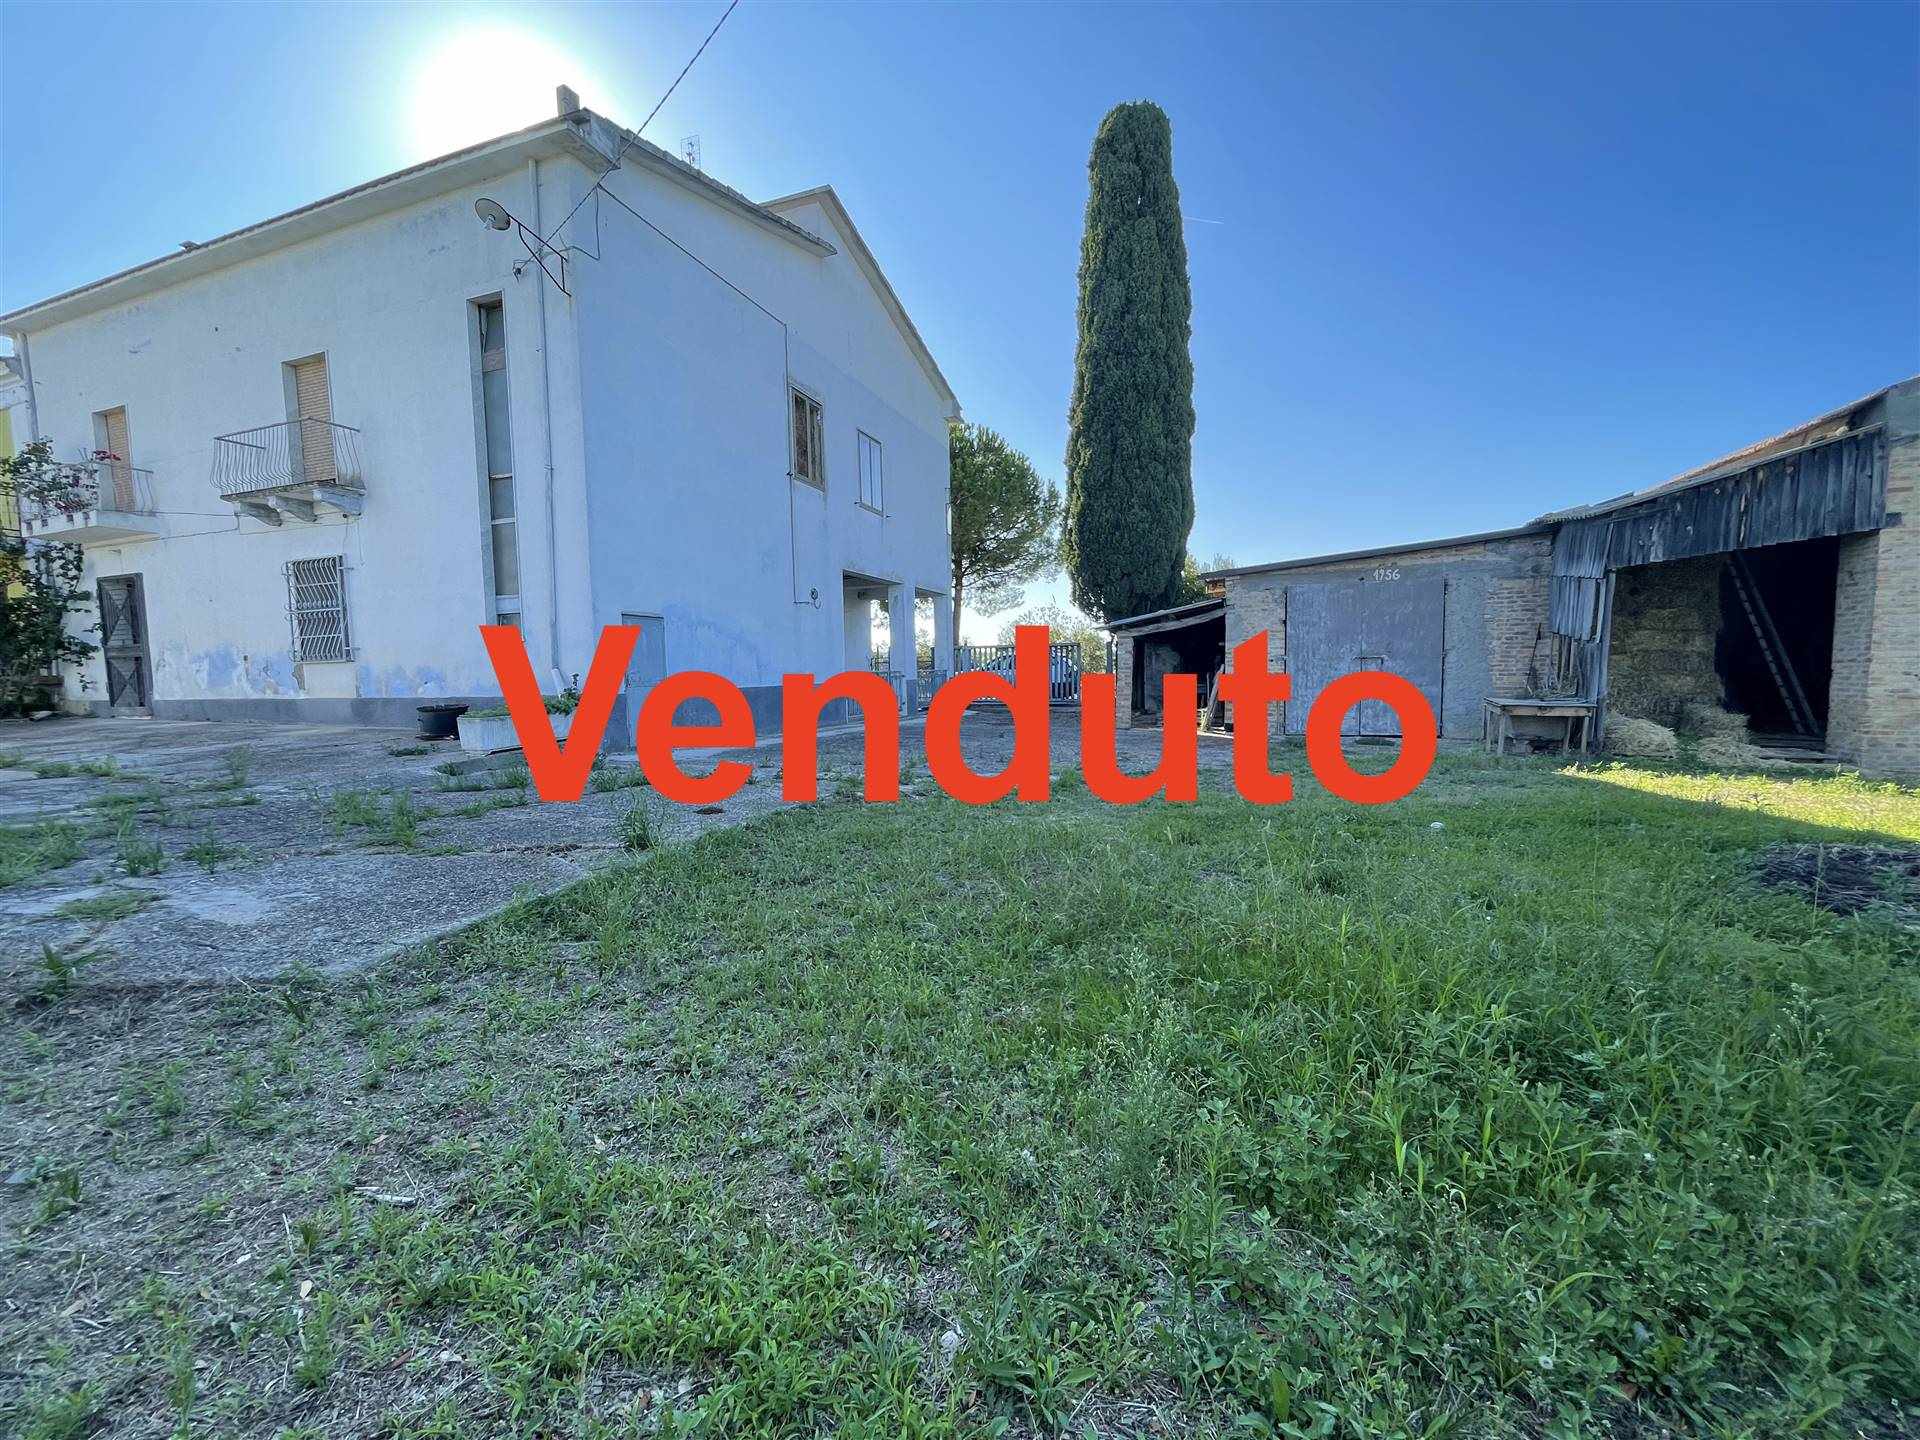 PAGLIARELLI, VASTO, Homestead for sale of 240 Sq. mt., Habitable, Heating Non-existent, Energetic class: G, Epi: 1 kwh/m2 year, placed at 1° on 2, 